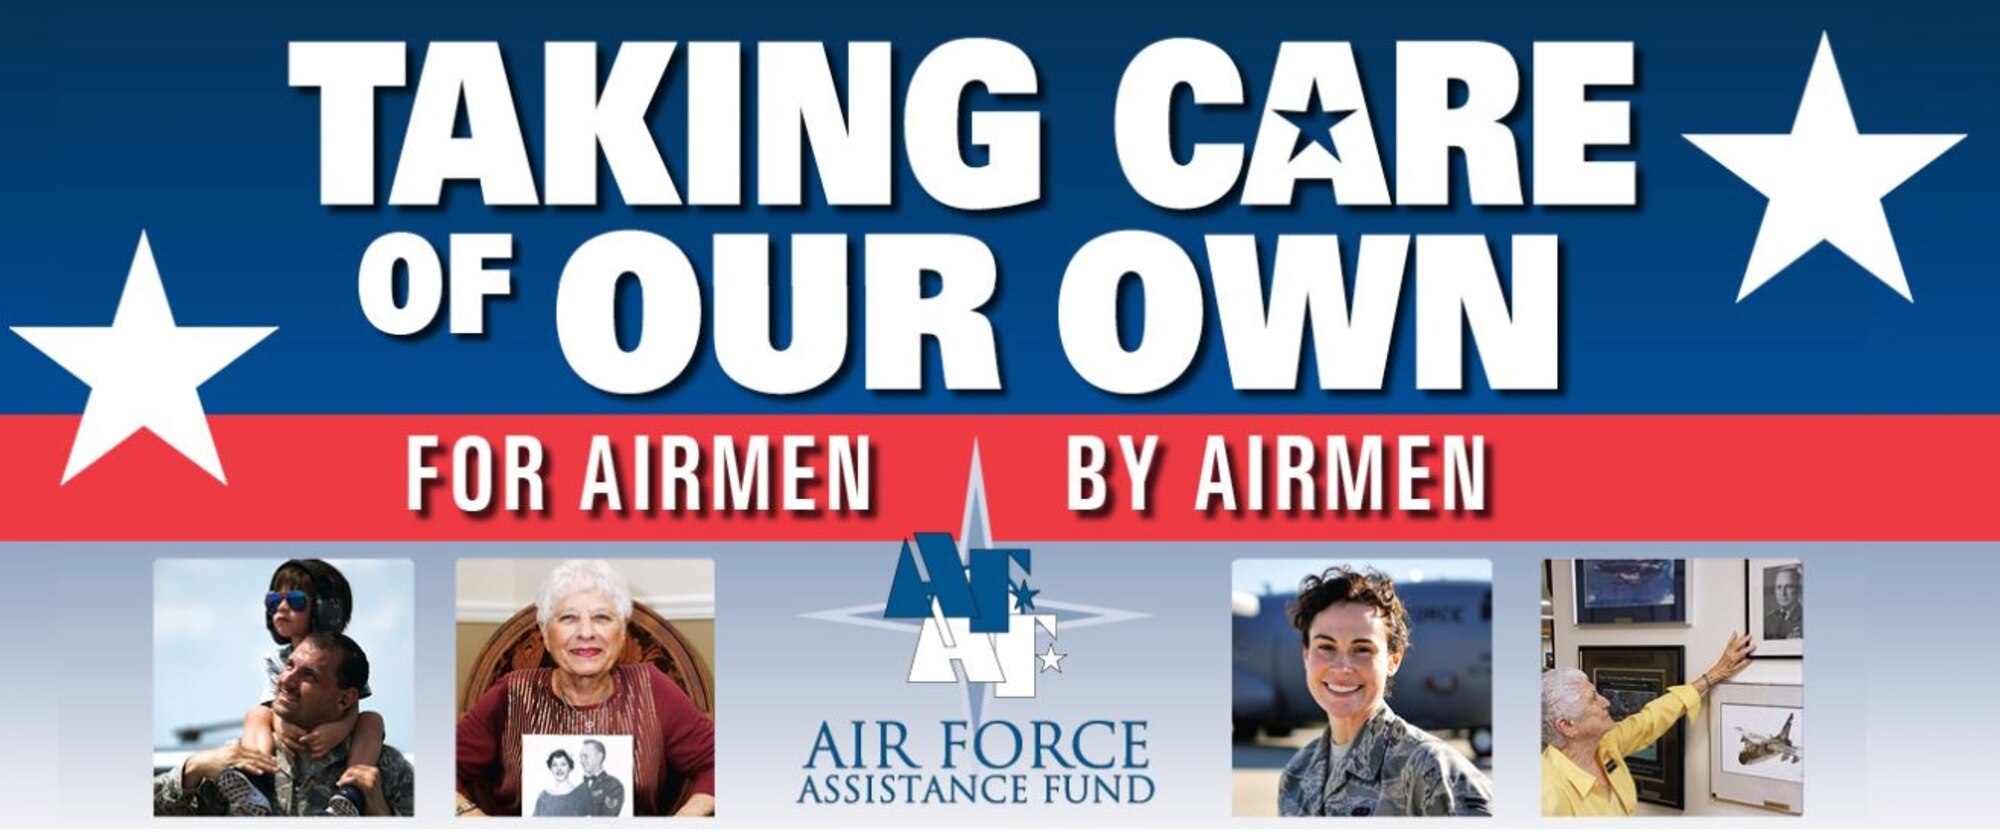 The 2020 Air Force Assistance Fund Summer Campaign will take place at Hanscom Air Force Base July 27 through Aug. 7. This year’s theme is “For Airmen, by Airmen.” (courtesy graphic)